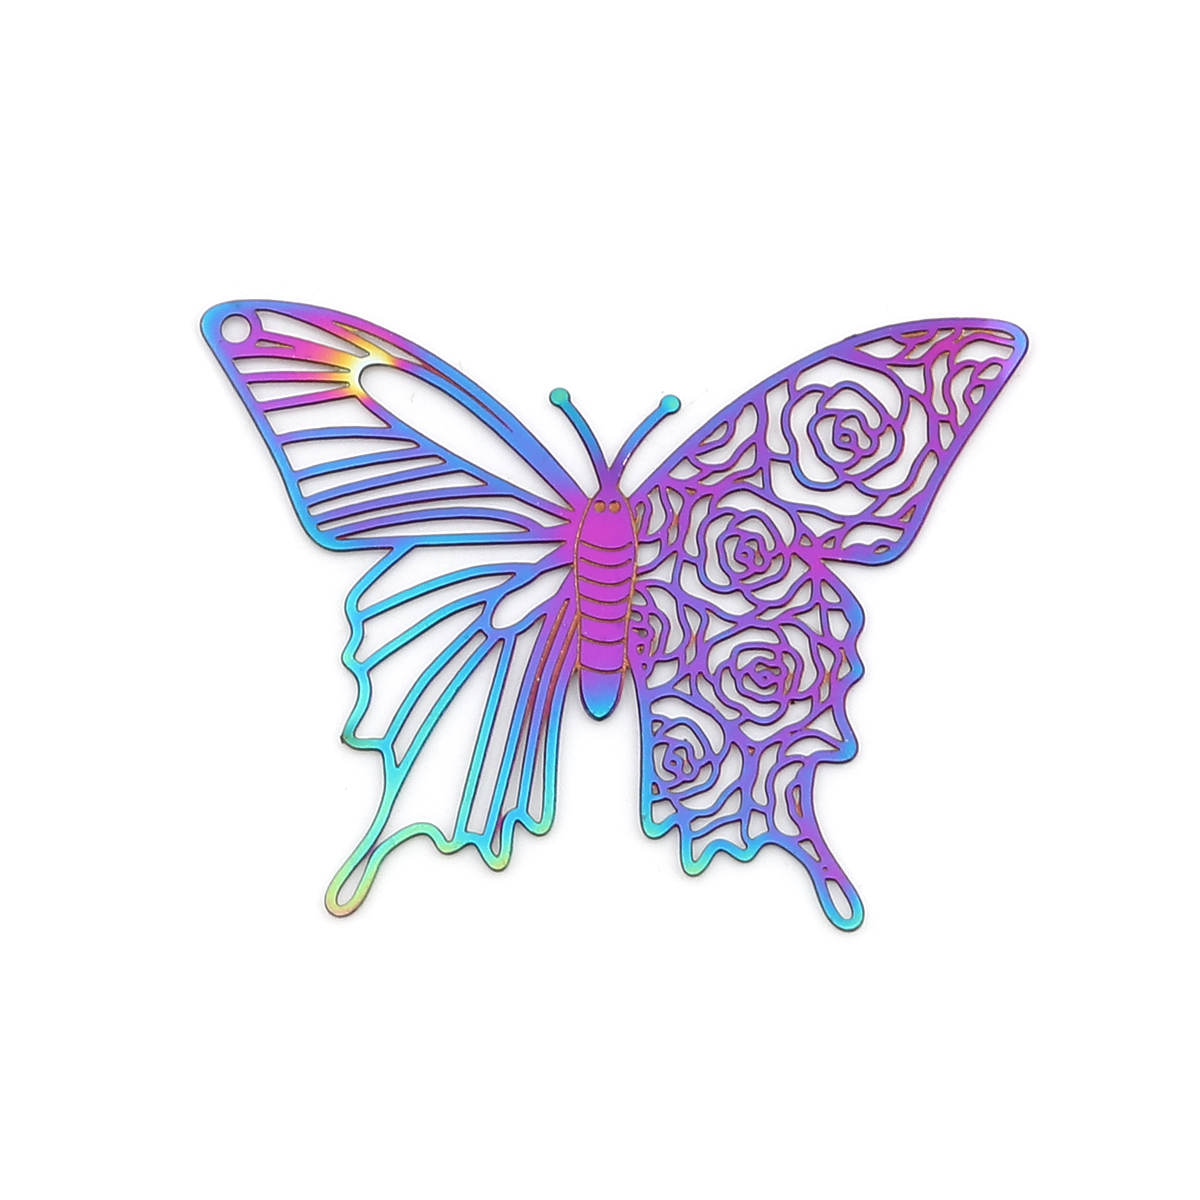 Picture of Stainless Steel Insect Connectors Butterfly Animal Purple & Blue Rose Flower Filigree Stamping 40mm x 30mm, 10 PCs